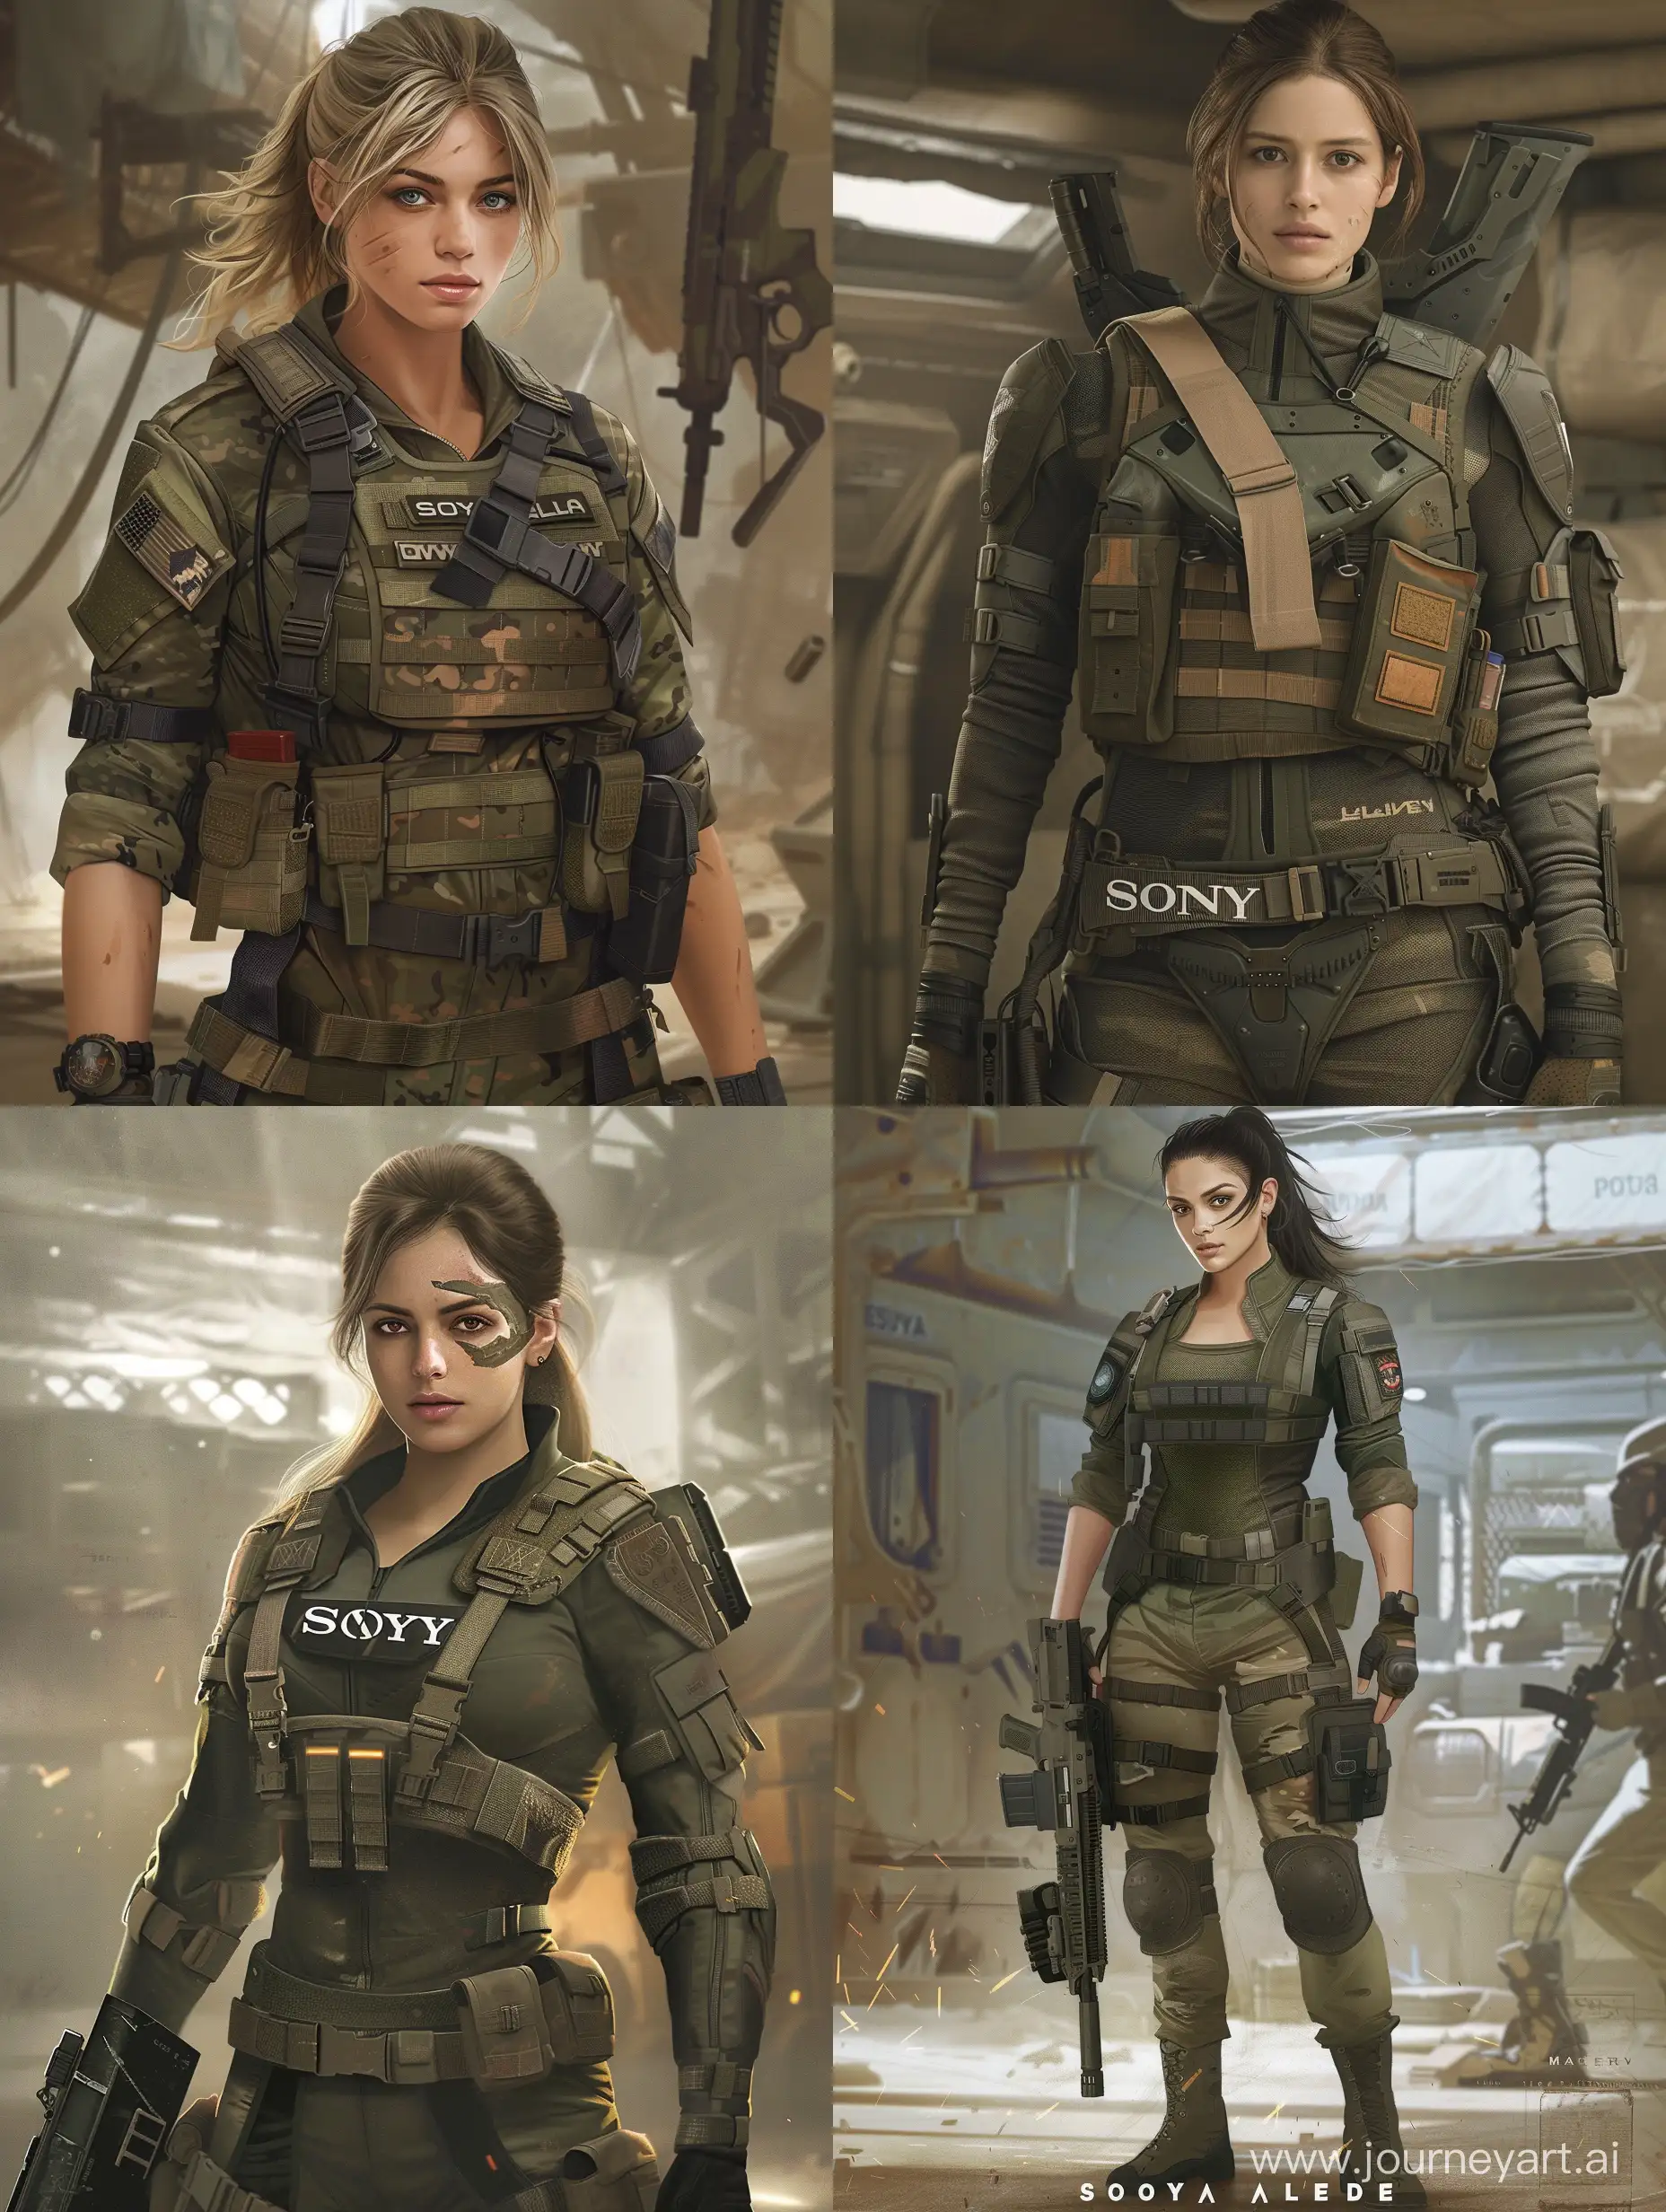 Craft a prompt closely resembling Sonya Blade, featuring a full-body depiction in an attractive, detailed, photorealistic costume. Showcase Sonya's toughness and determination by portraying her in a sleek and practical military outfit, accentuated with tactical gear and weaponry. Pay meticulous attention to the intricate details of her attire, from the precise stitching on her uniform to the functional pockets and straps. Capture Sonya's steely gaze and confident posture, conveying her status as a seasoned warrior. Set the scene against a backdrop suggestive of a military base or battlefield, utilizing lighting to enhance the realism and intensity of the portrayal.